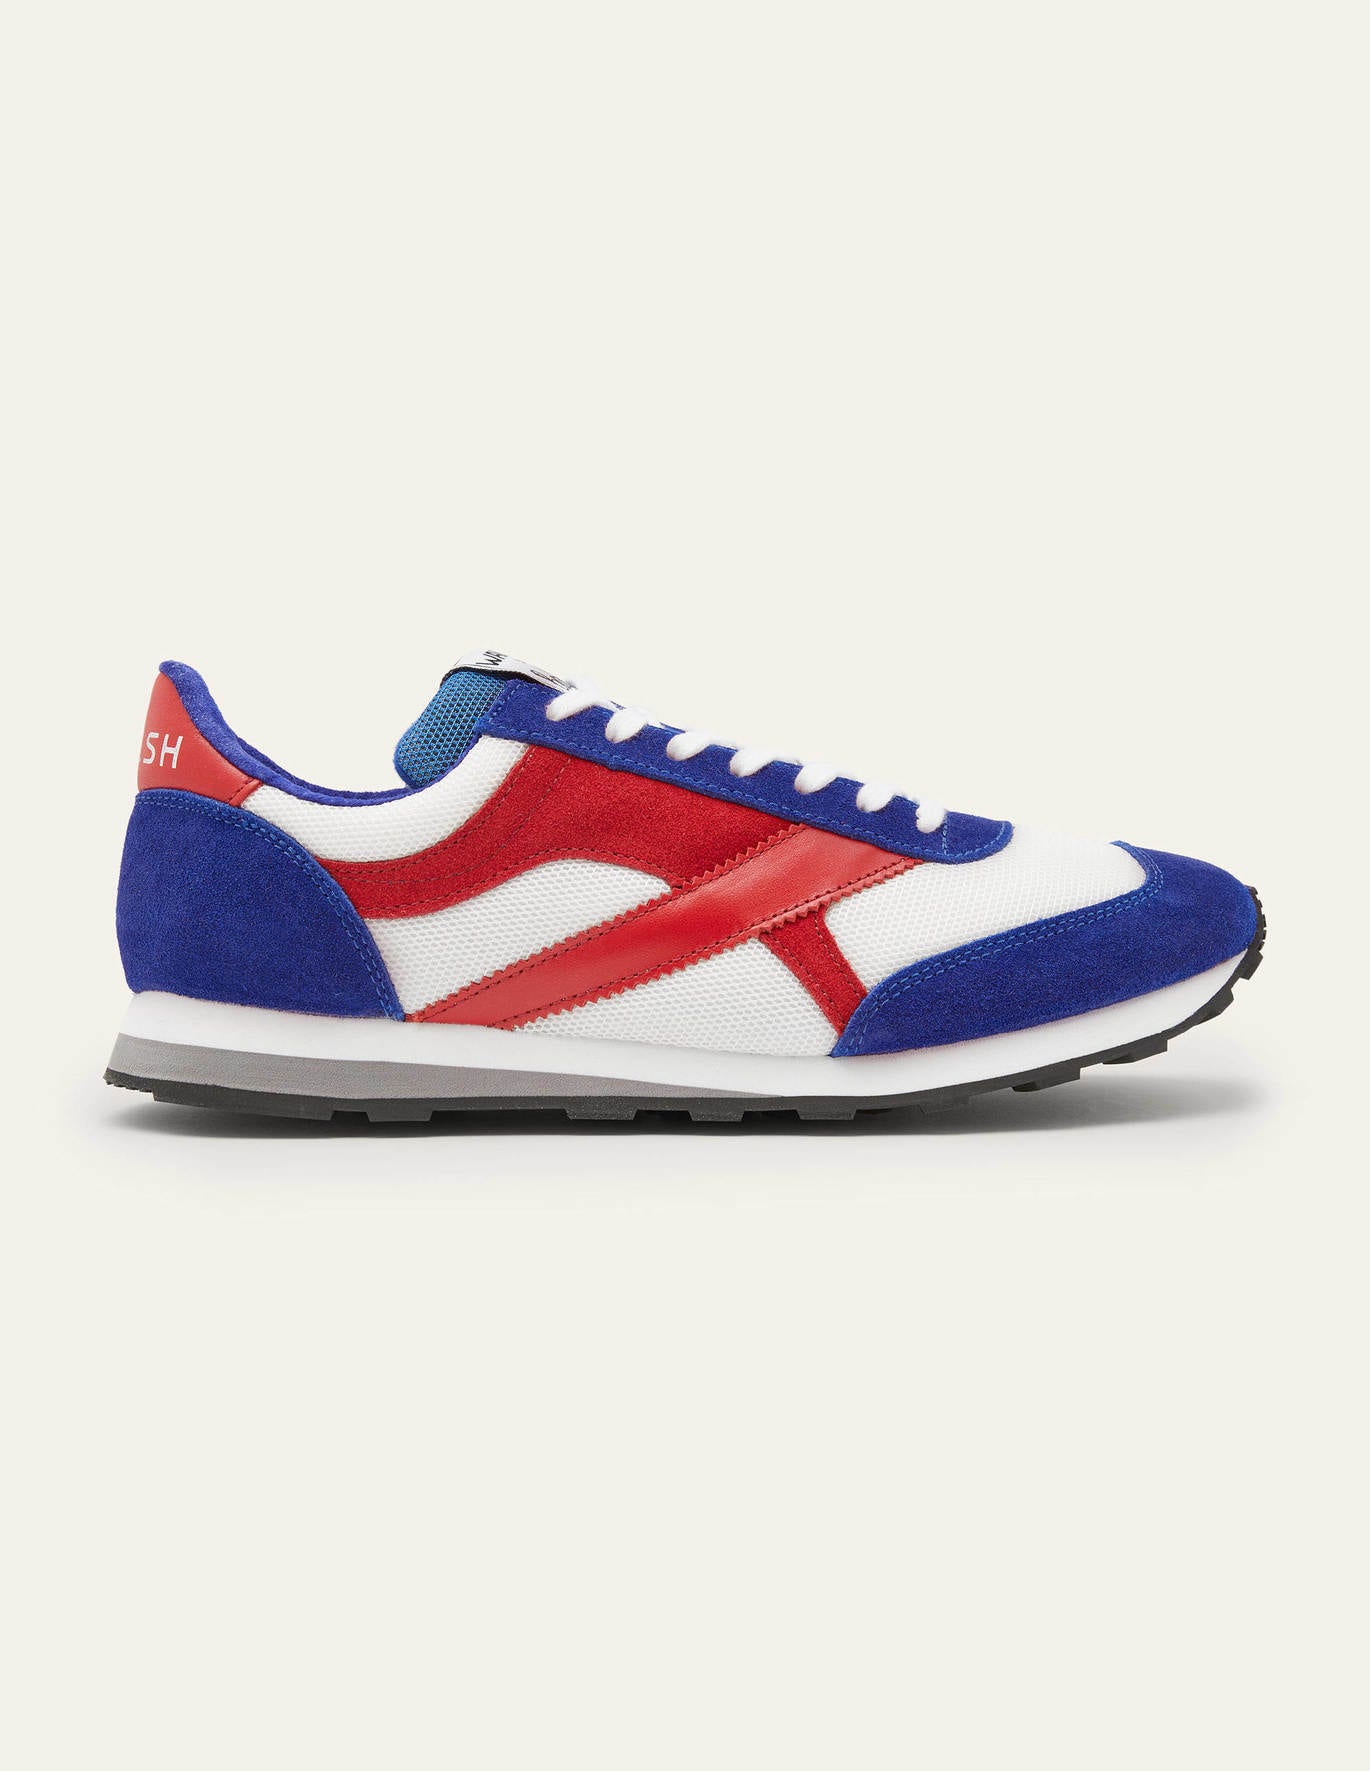 Boden Walsh Tornado Sneakers - Red/White/Blue